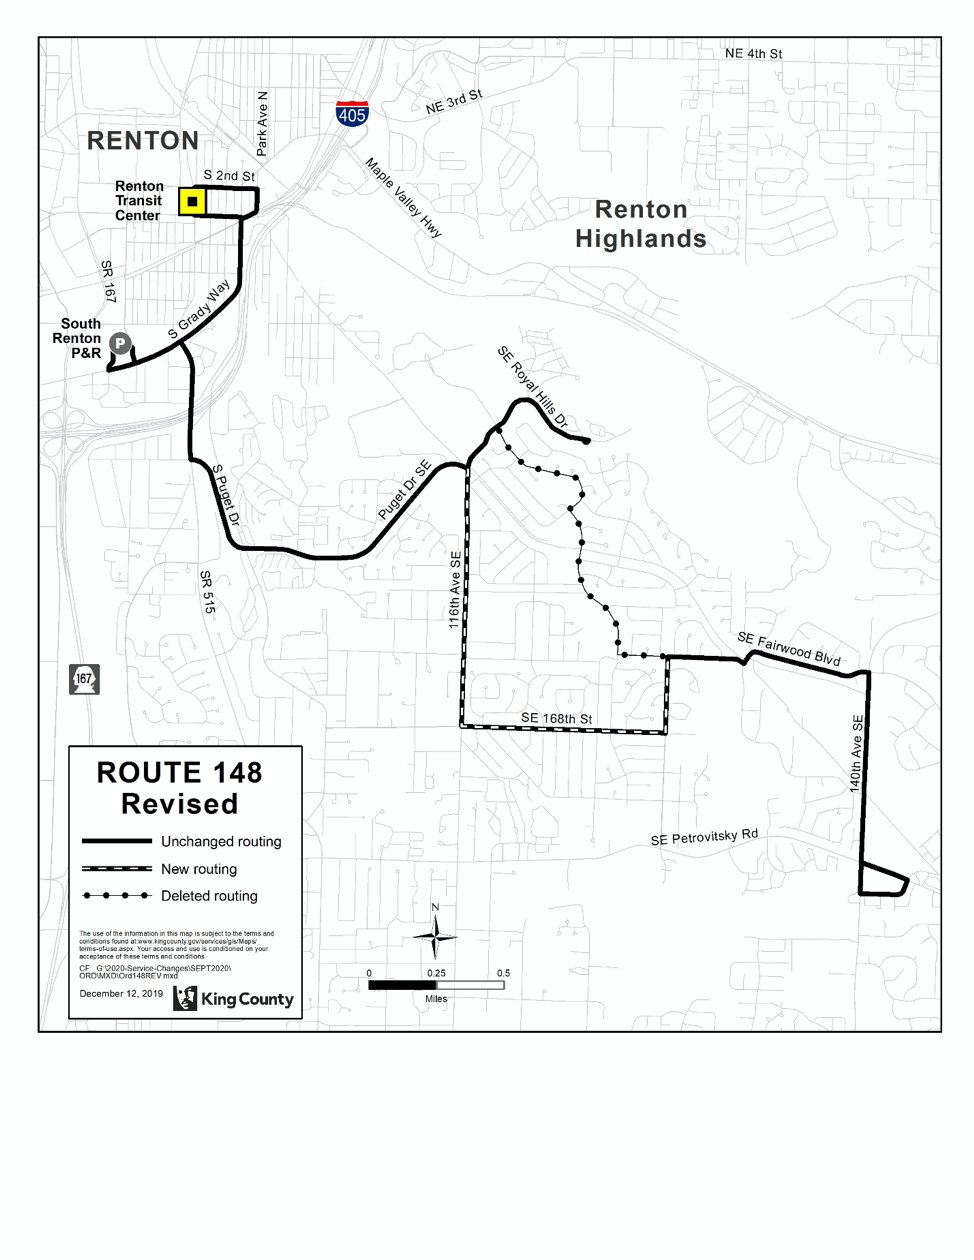 Revised Route 148. (King County)